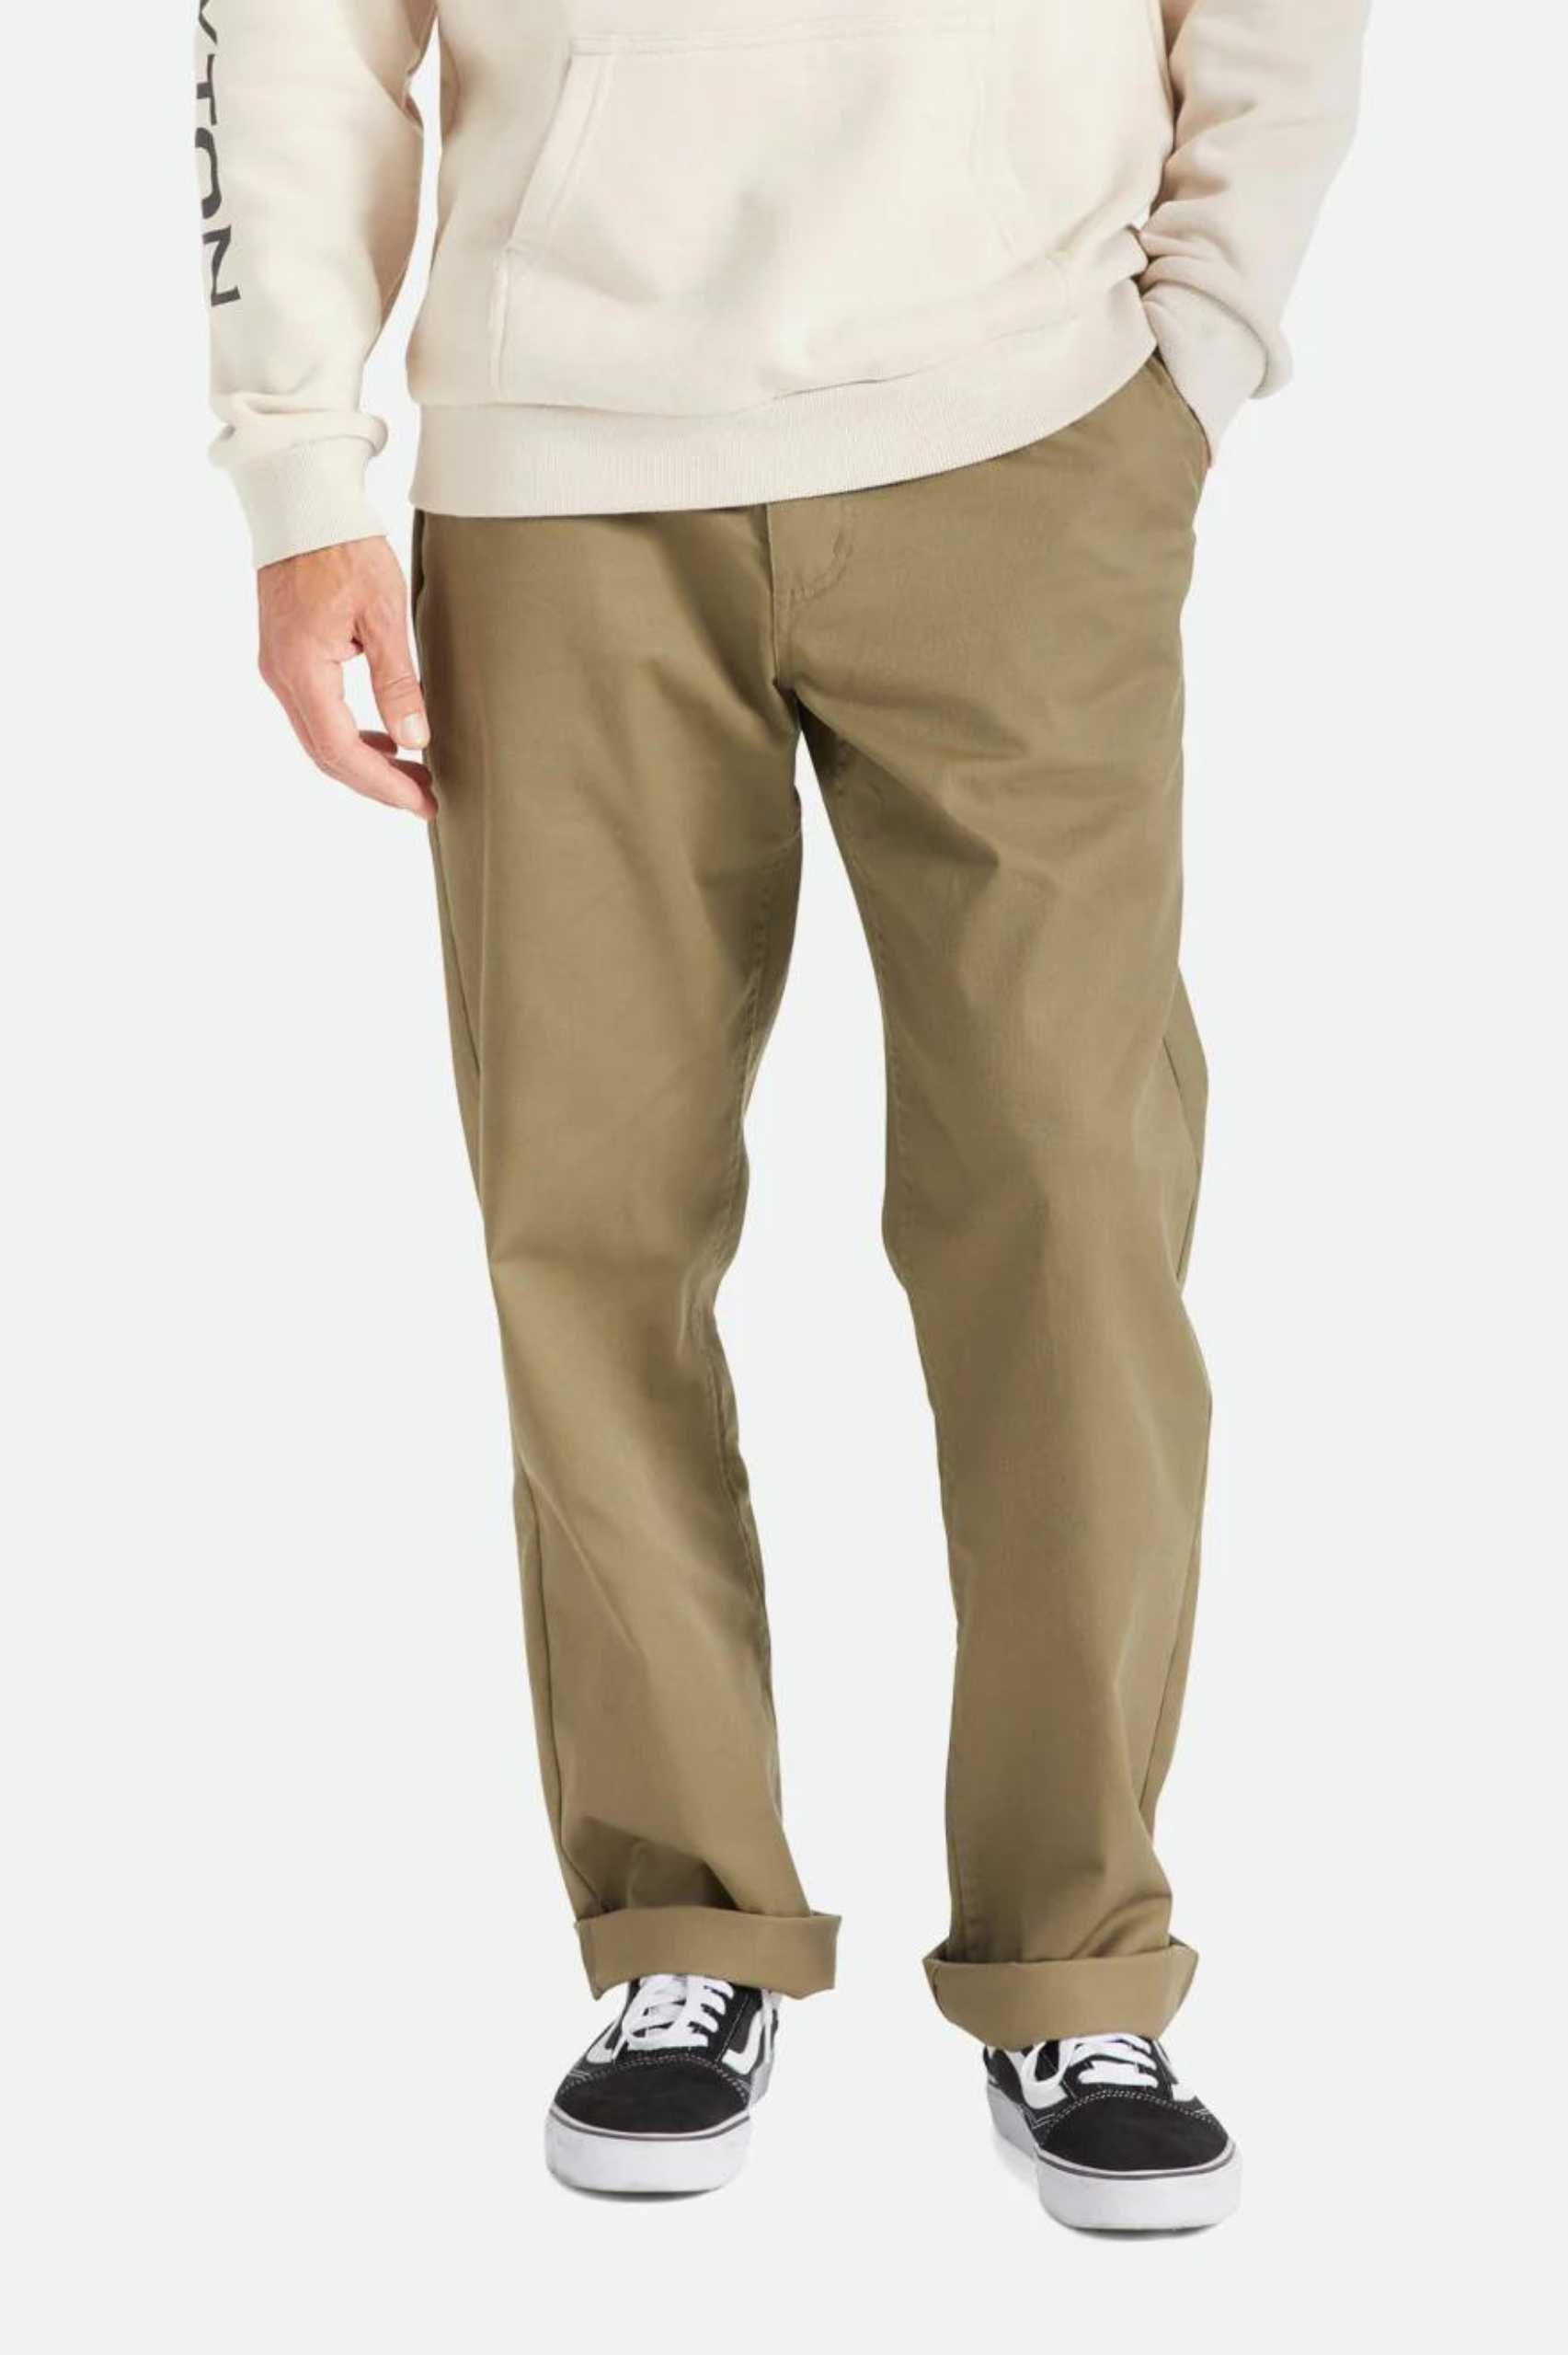 Brixton Mens Choice Chino Relaxed Pan in Military Olive